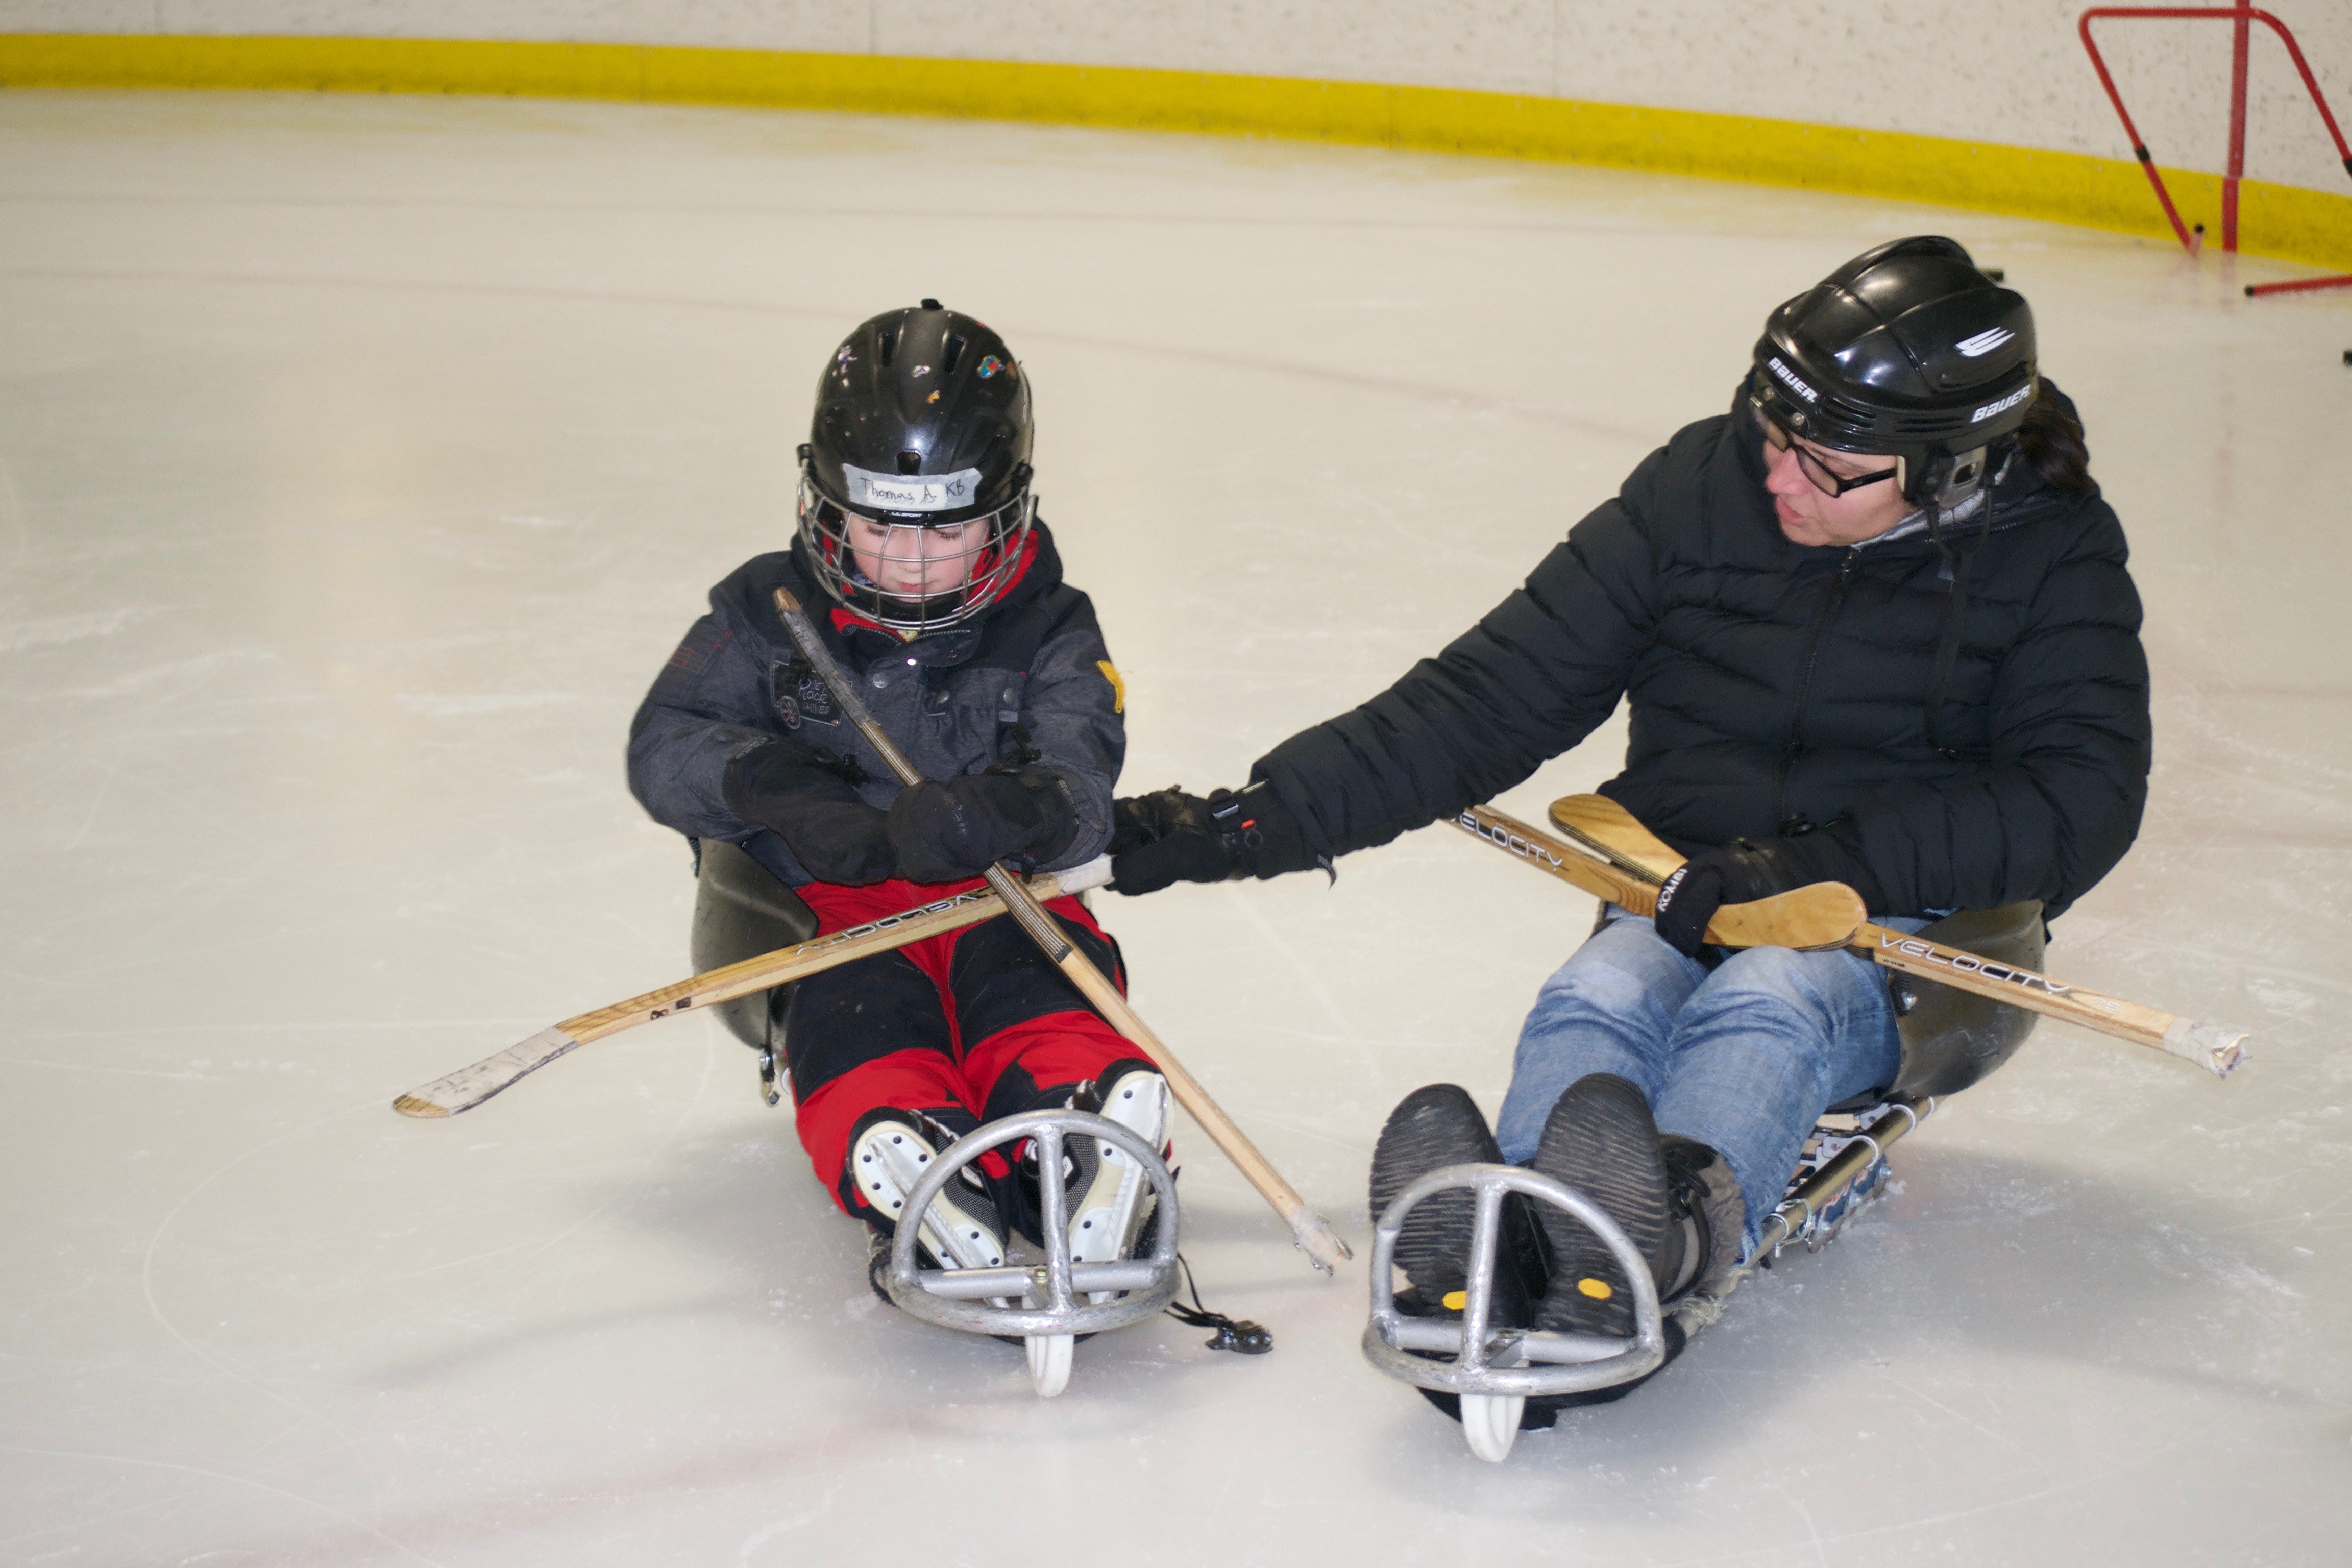 Marjorie and her son Thomas playing hockey together on an ice rink.